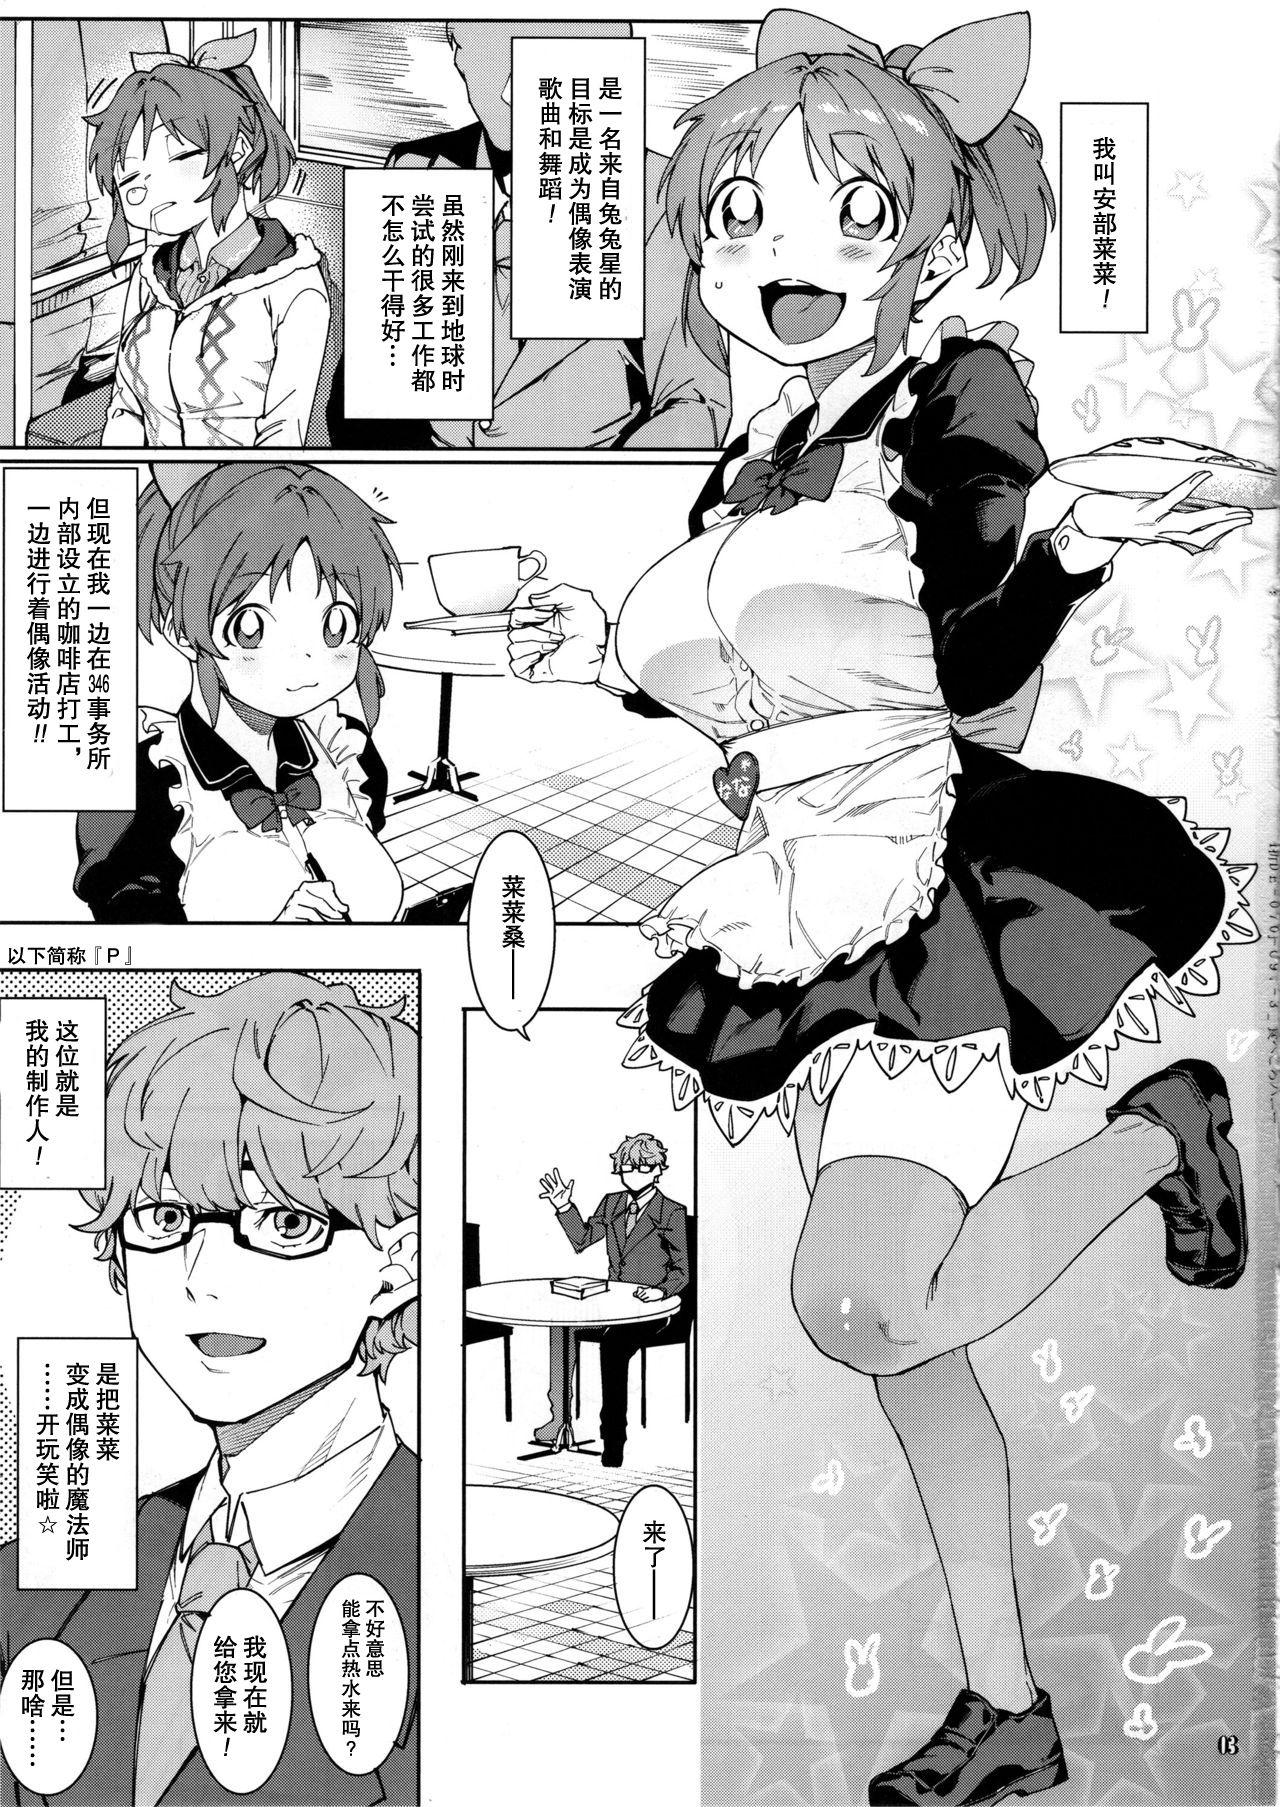 Assfuck Tabegoro Bunny - The idolmaster Calle - Page 3